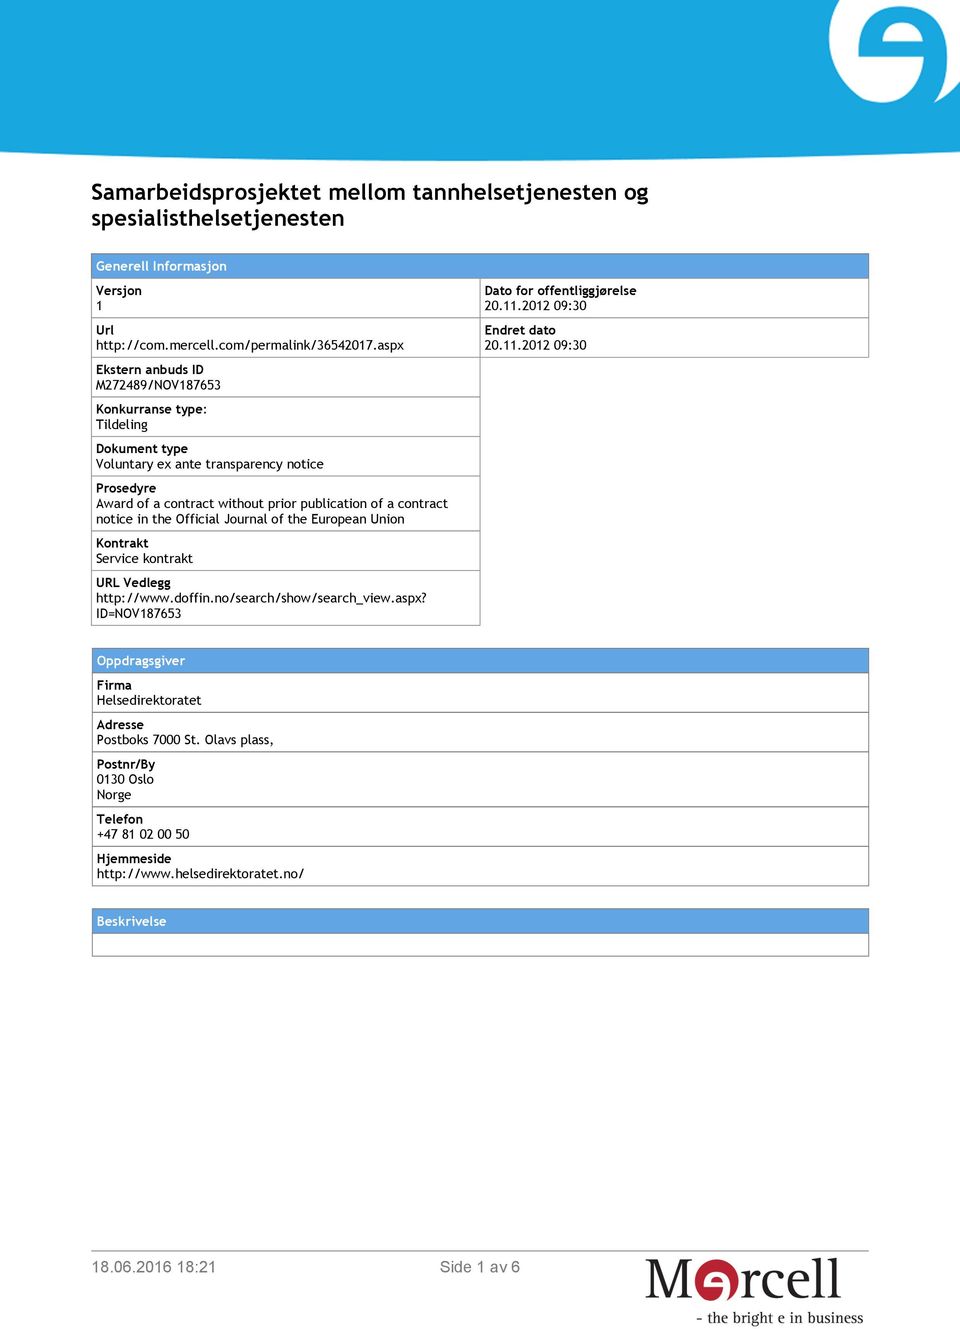 contract notice in the Official Journal of the European Union Kontrakt Service kontrakt URL Vedlegg http://www.doffin.no/search/show/search_view.aspx?